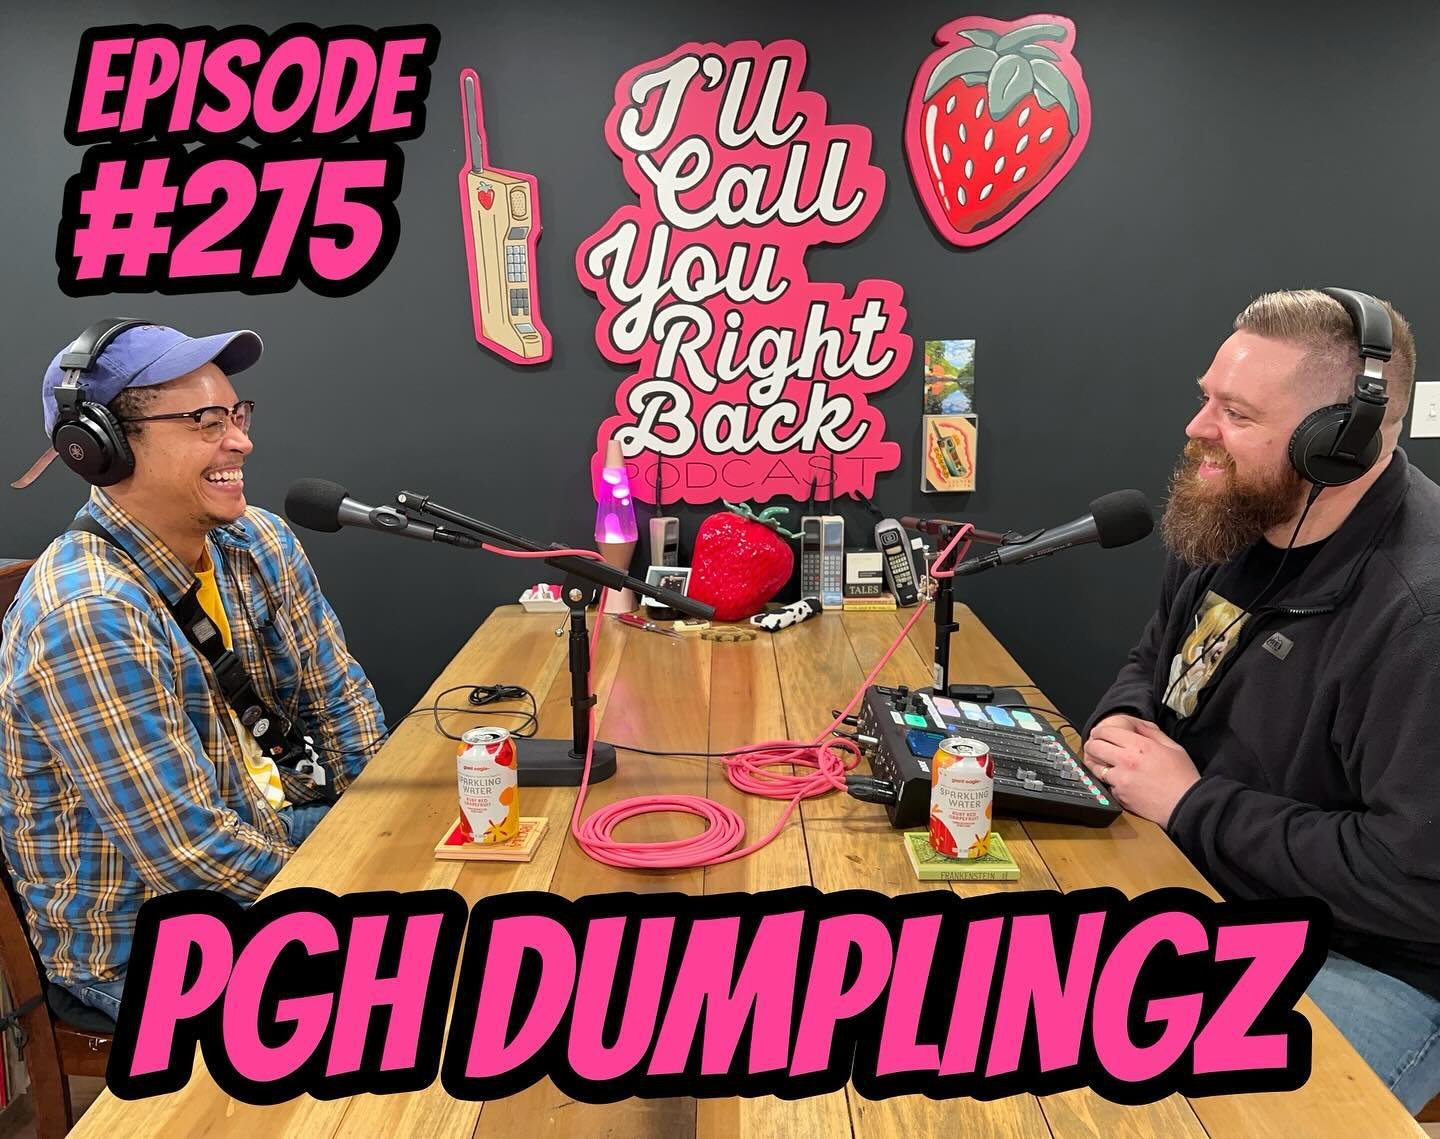 This week, I sit down with chef and owner of the very delicious @pghdumplingz! Eric White is a man who&rsquo;s been finding his way around kitchens for over a decade. He has spent years working at every level of the food industry at every different p